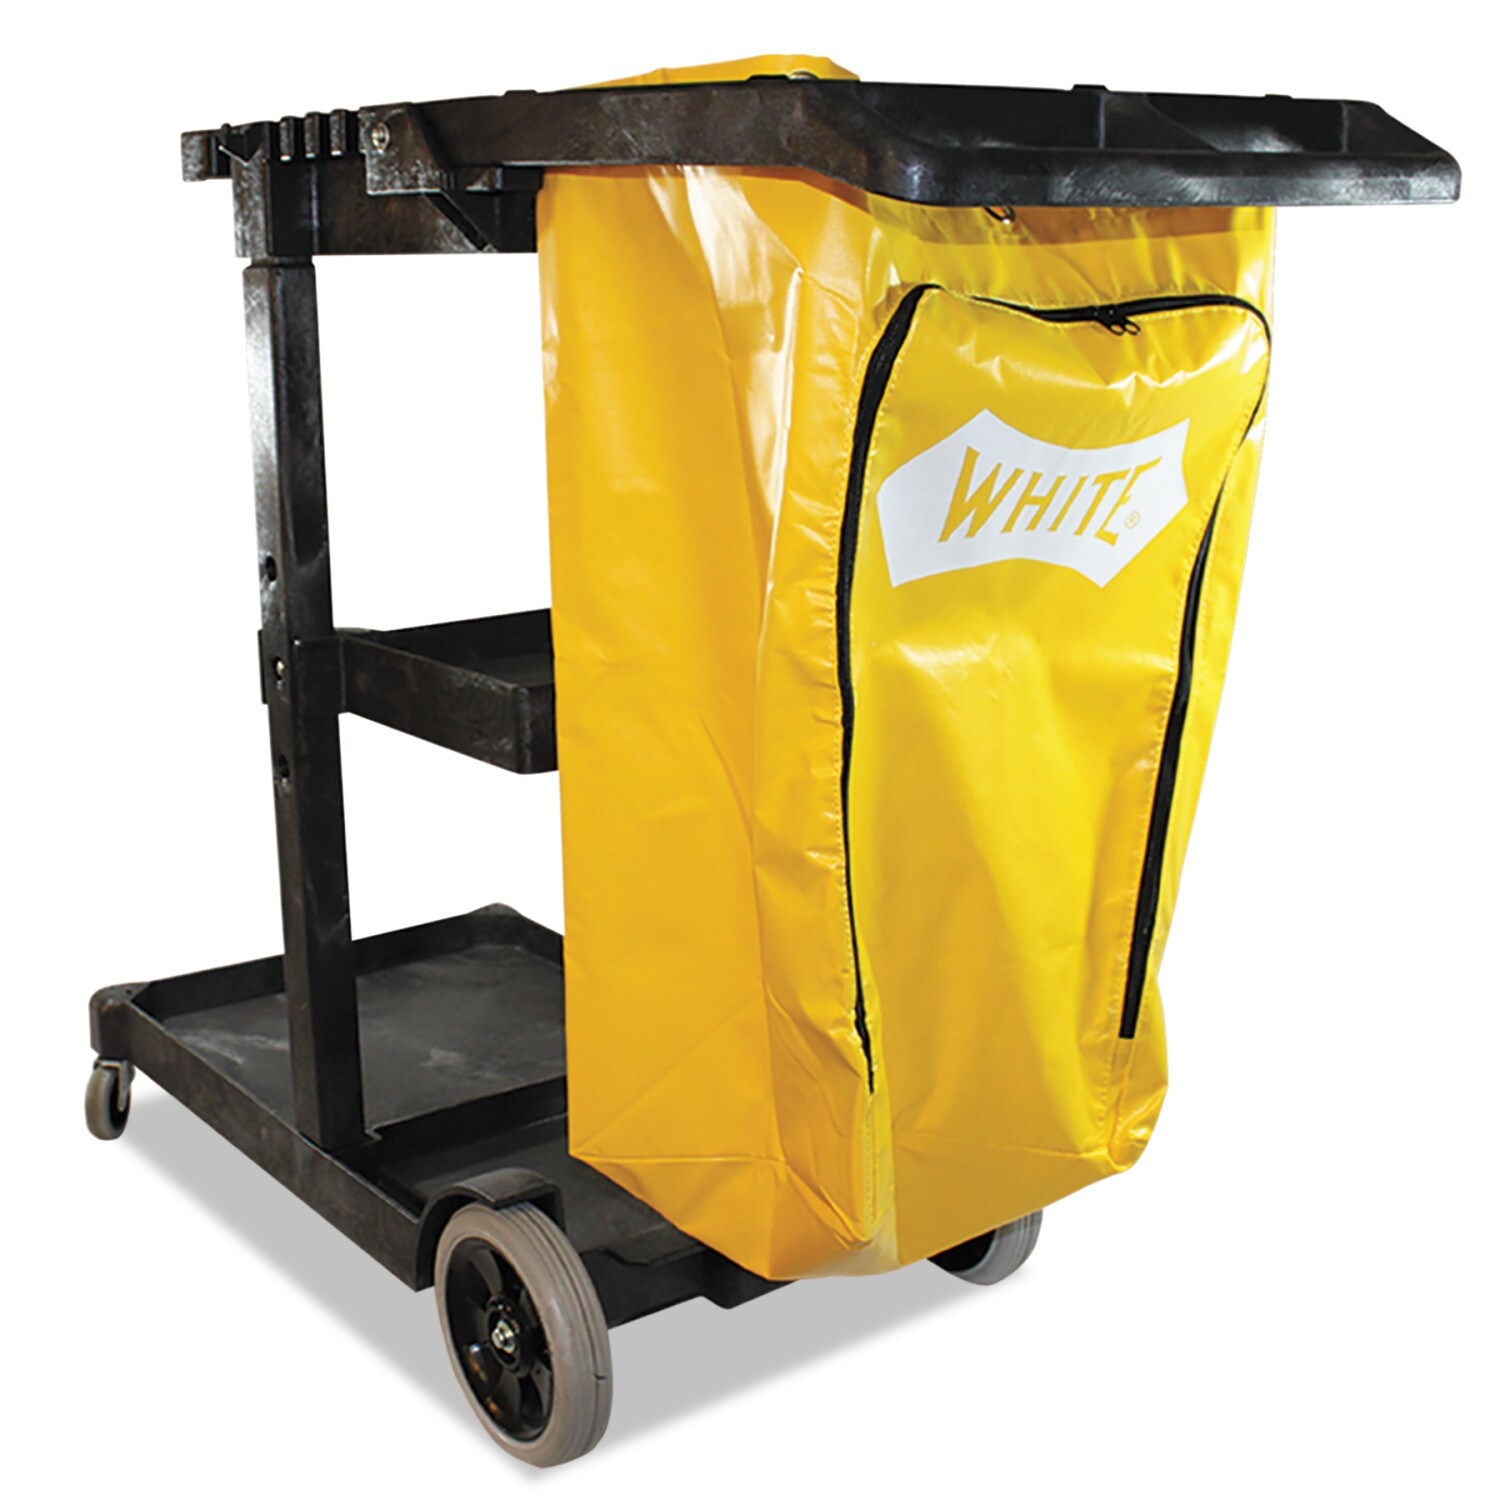 Alpine Industries Janitorial Cleaning Cart, 36-Quart Mop Bucket